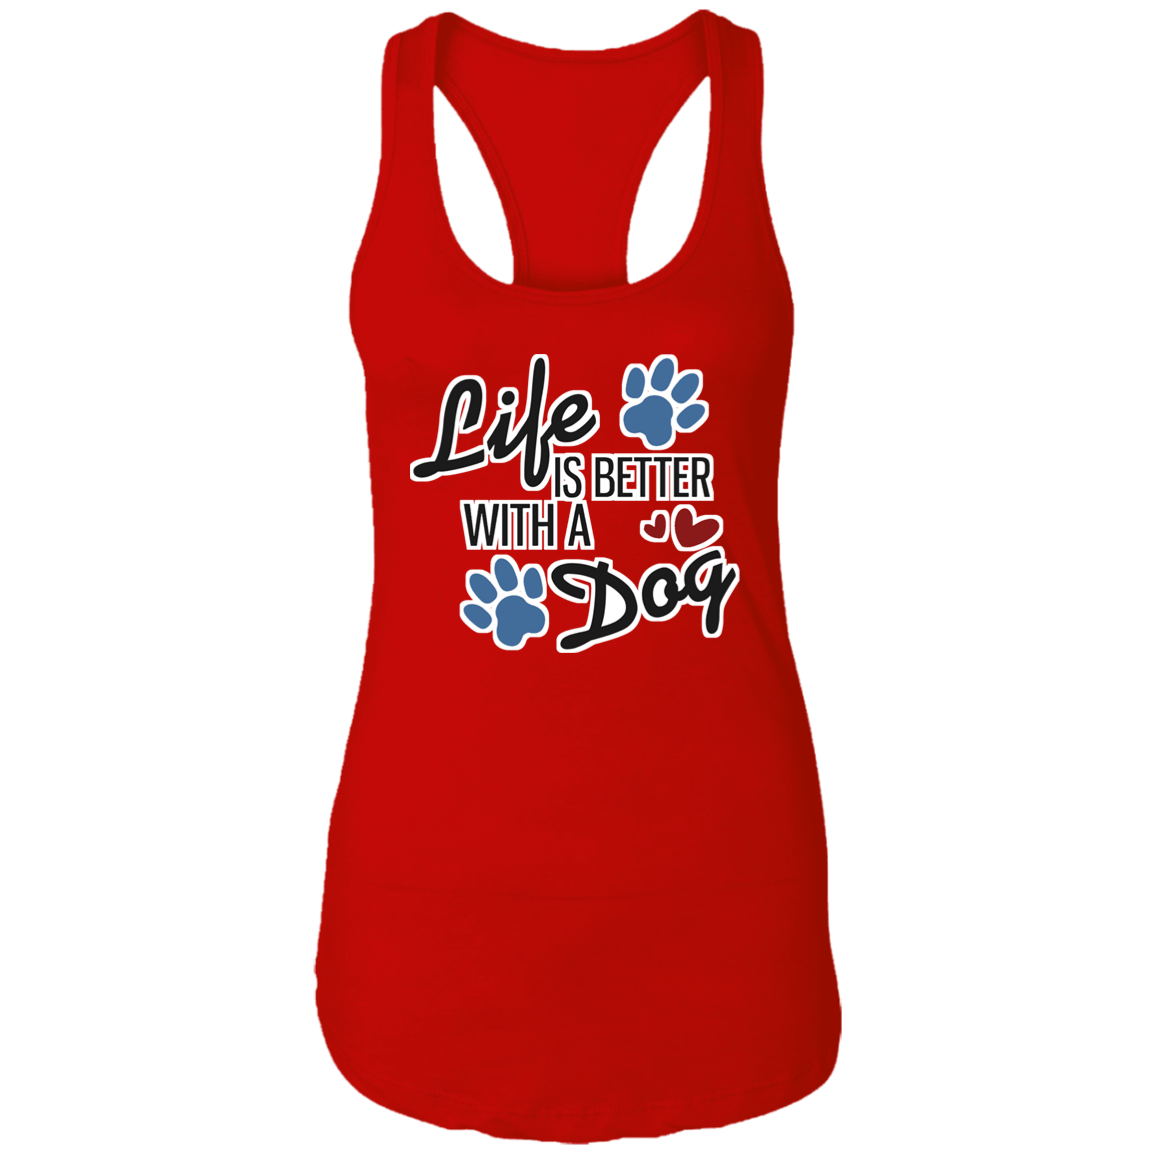 Life is Better with a Dog - Ladies Racerback Tank.